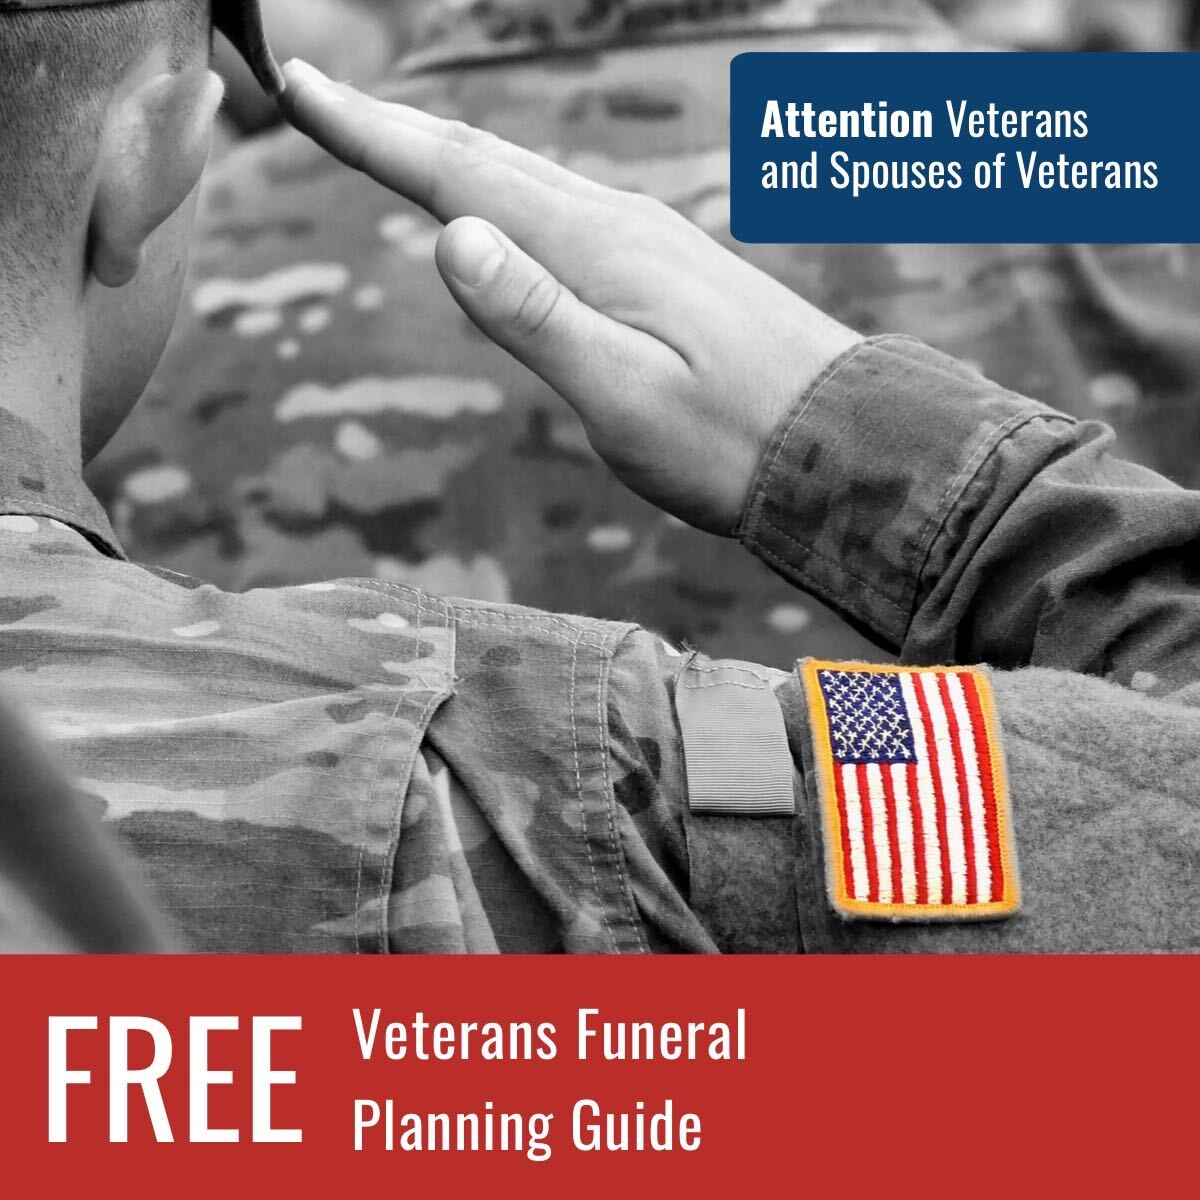 FREE Planning Guides